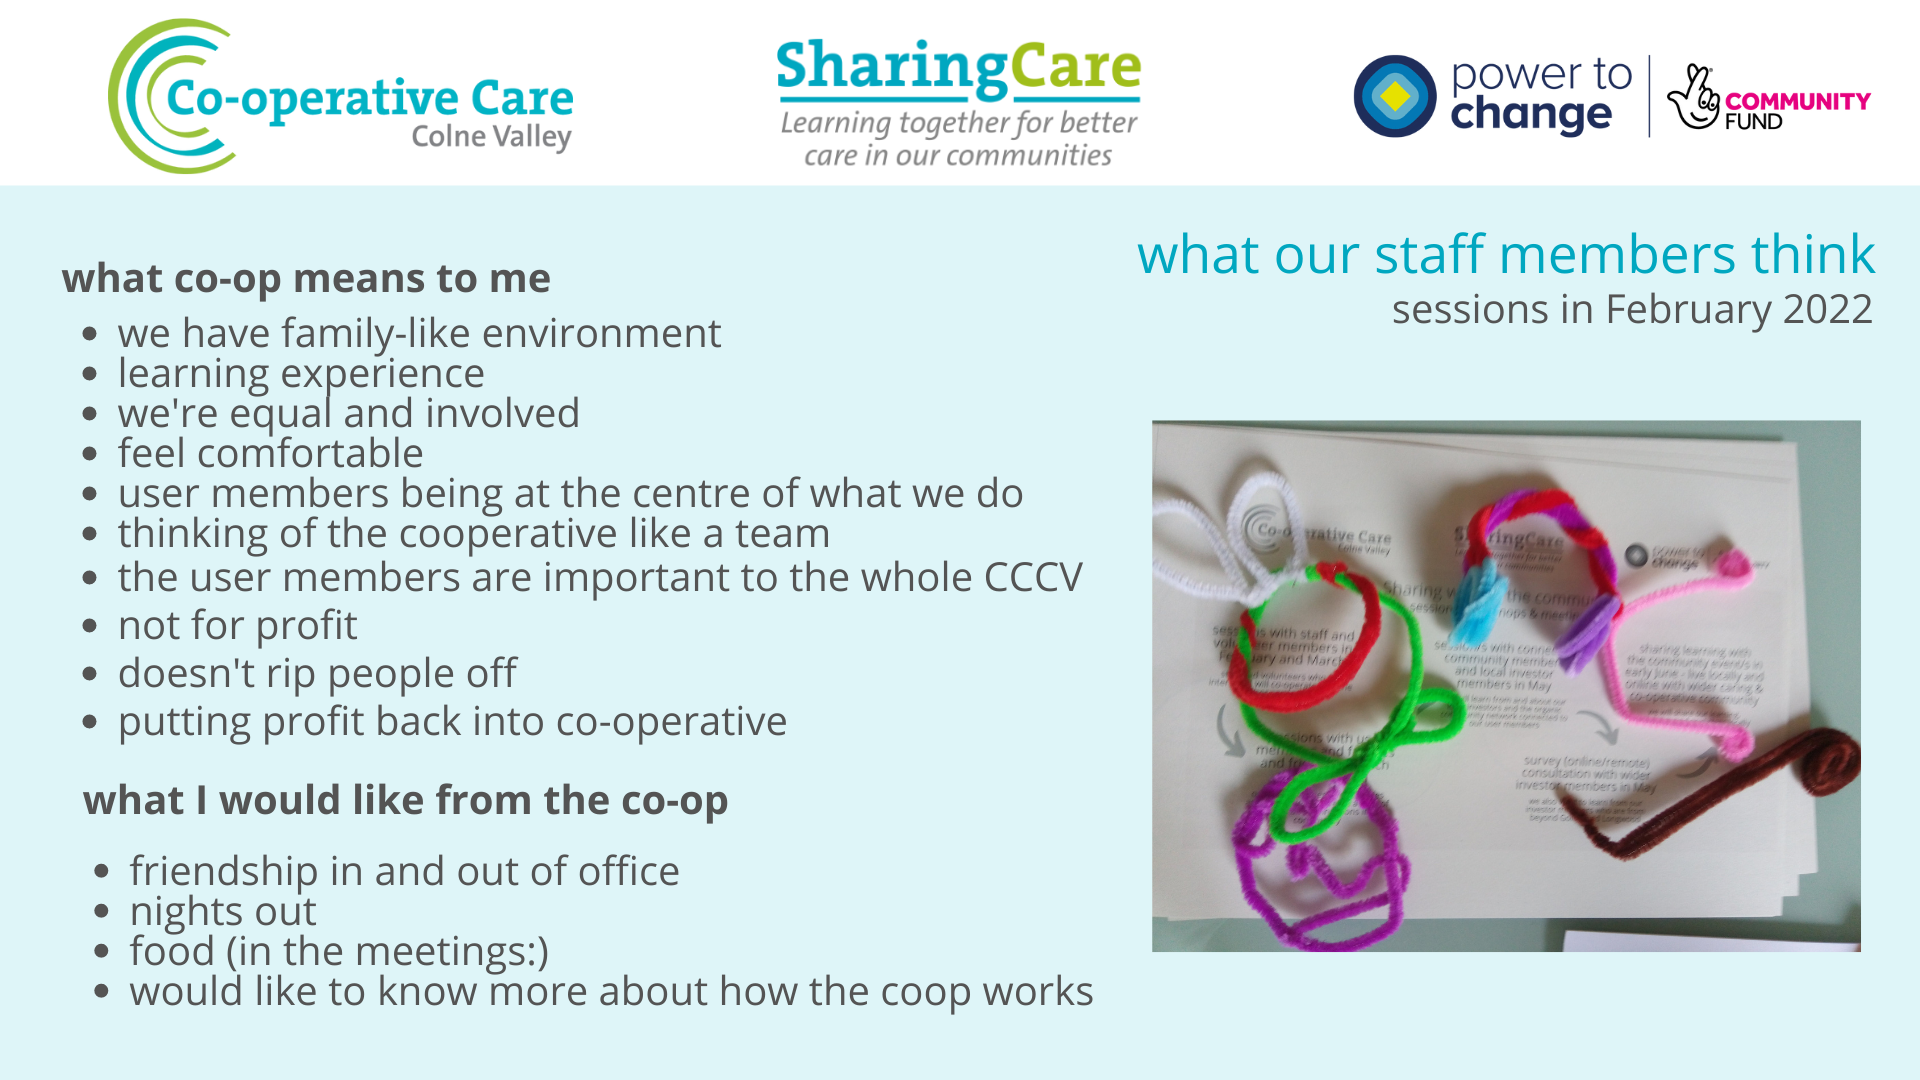 what staff have said during consultation